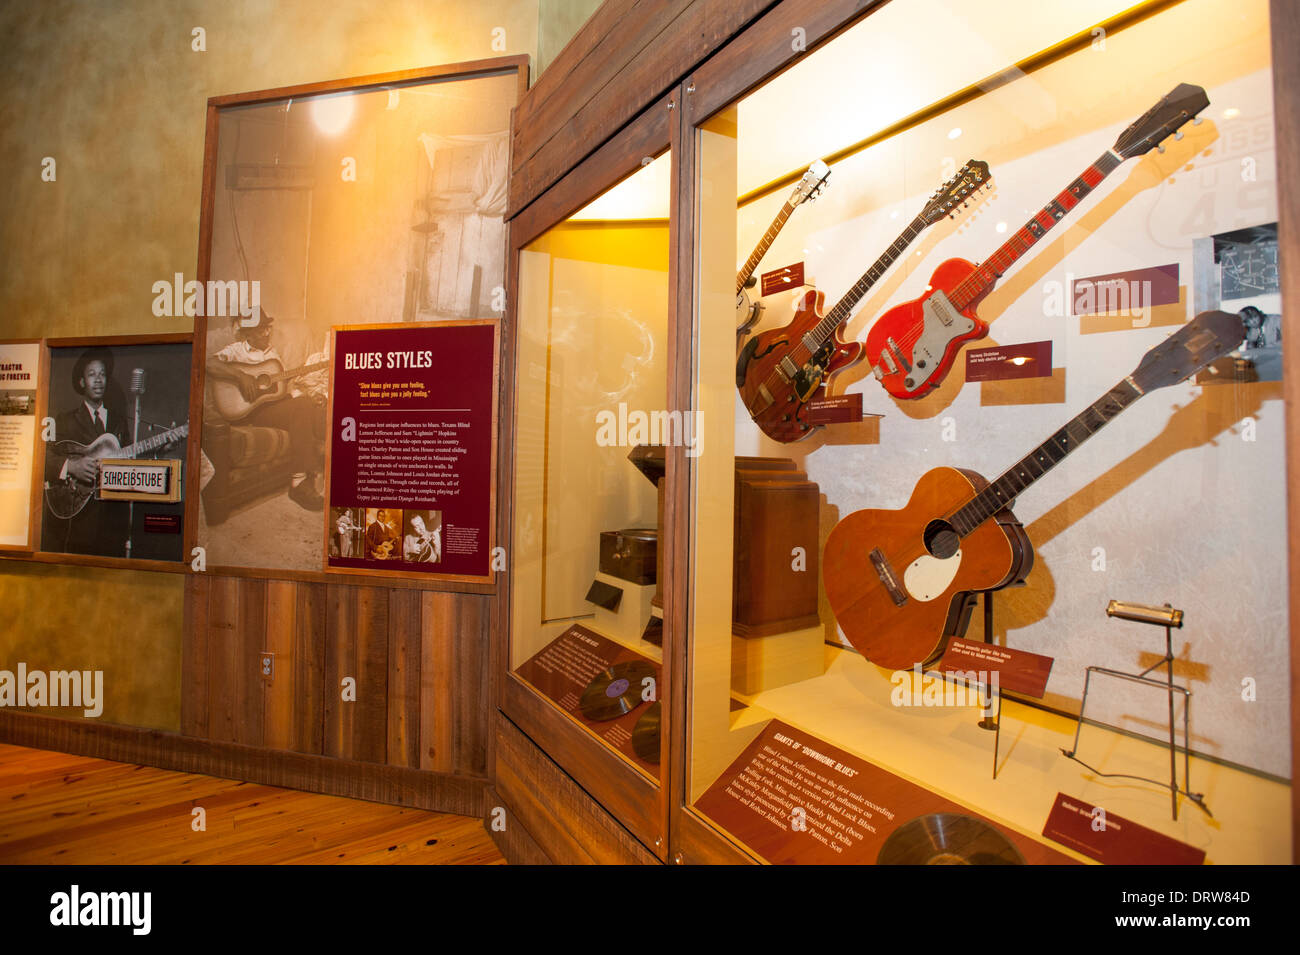 USA Mississippi MS Miss Indianola B B King Museum Blues great musician interior with guitars Stock Photo